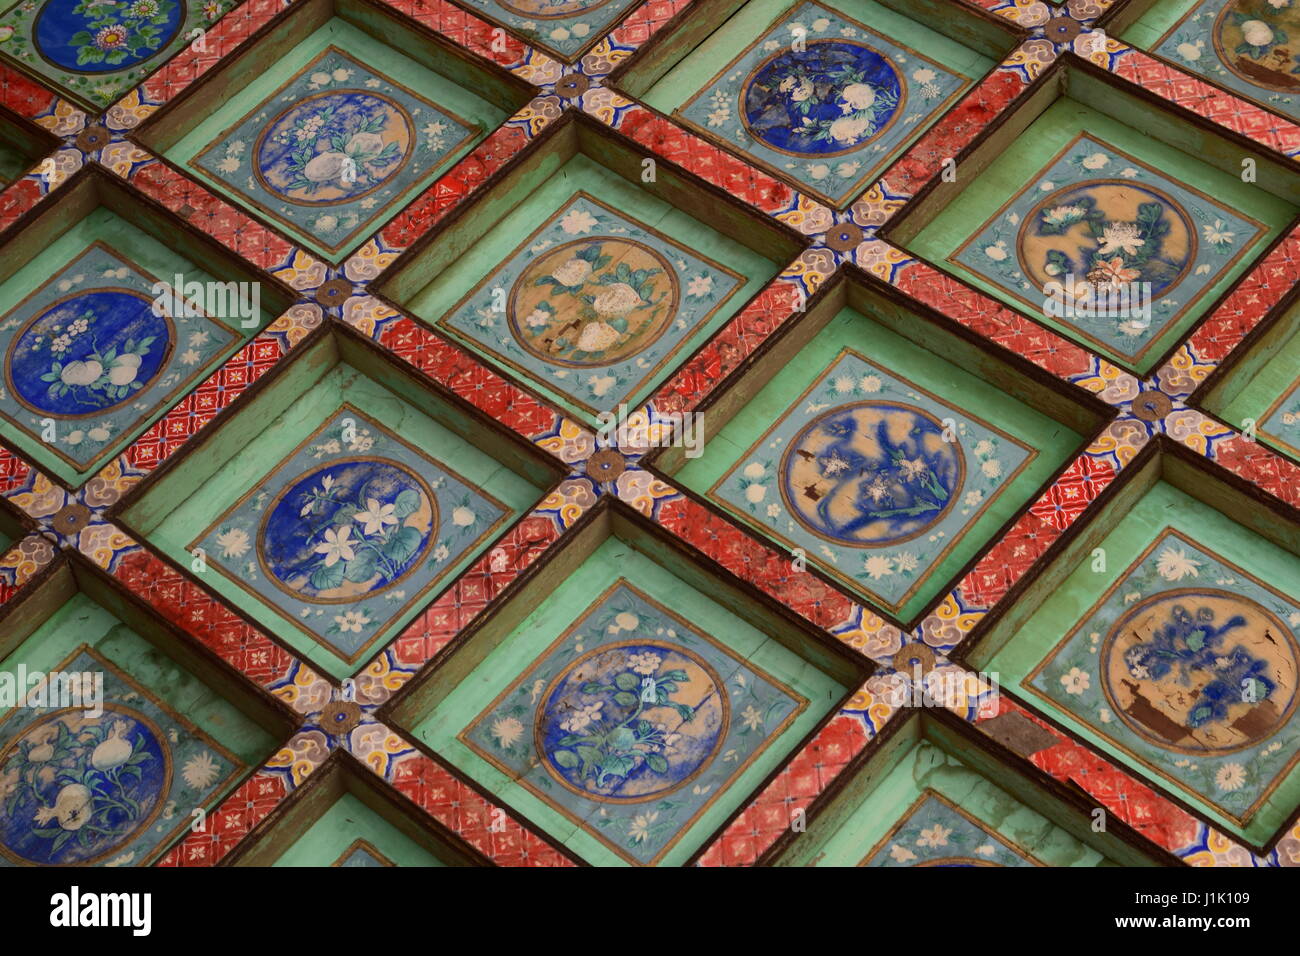 Beautiful Chinese art decorating the ceiling of the Forbidden City palace halls in Beijing Stock Photo